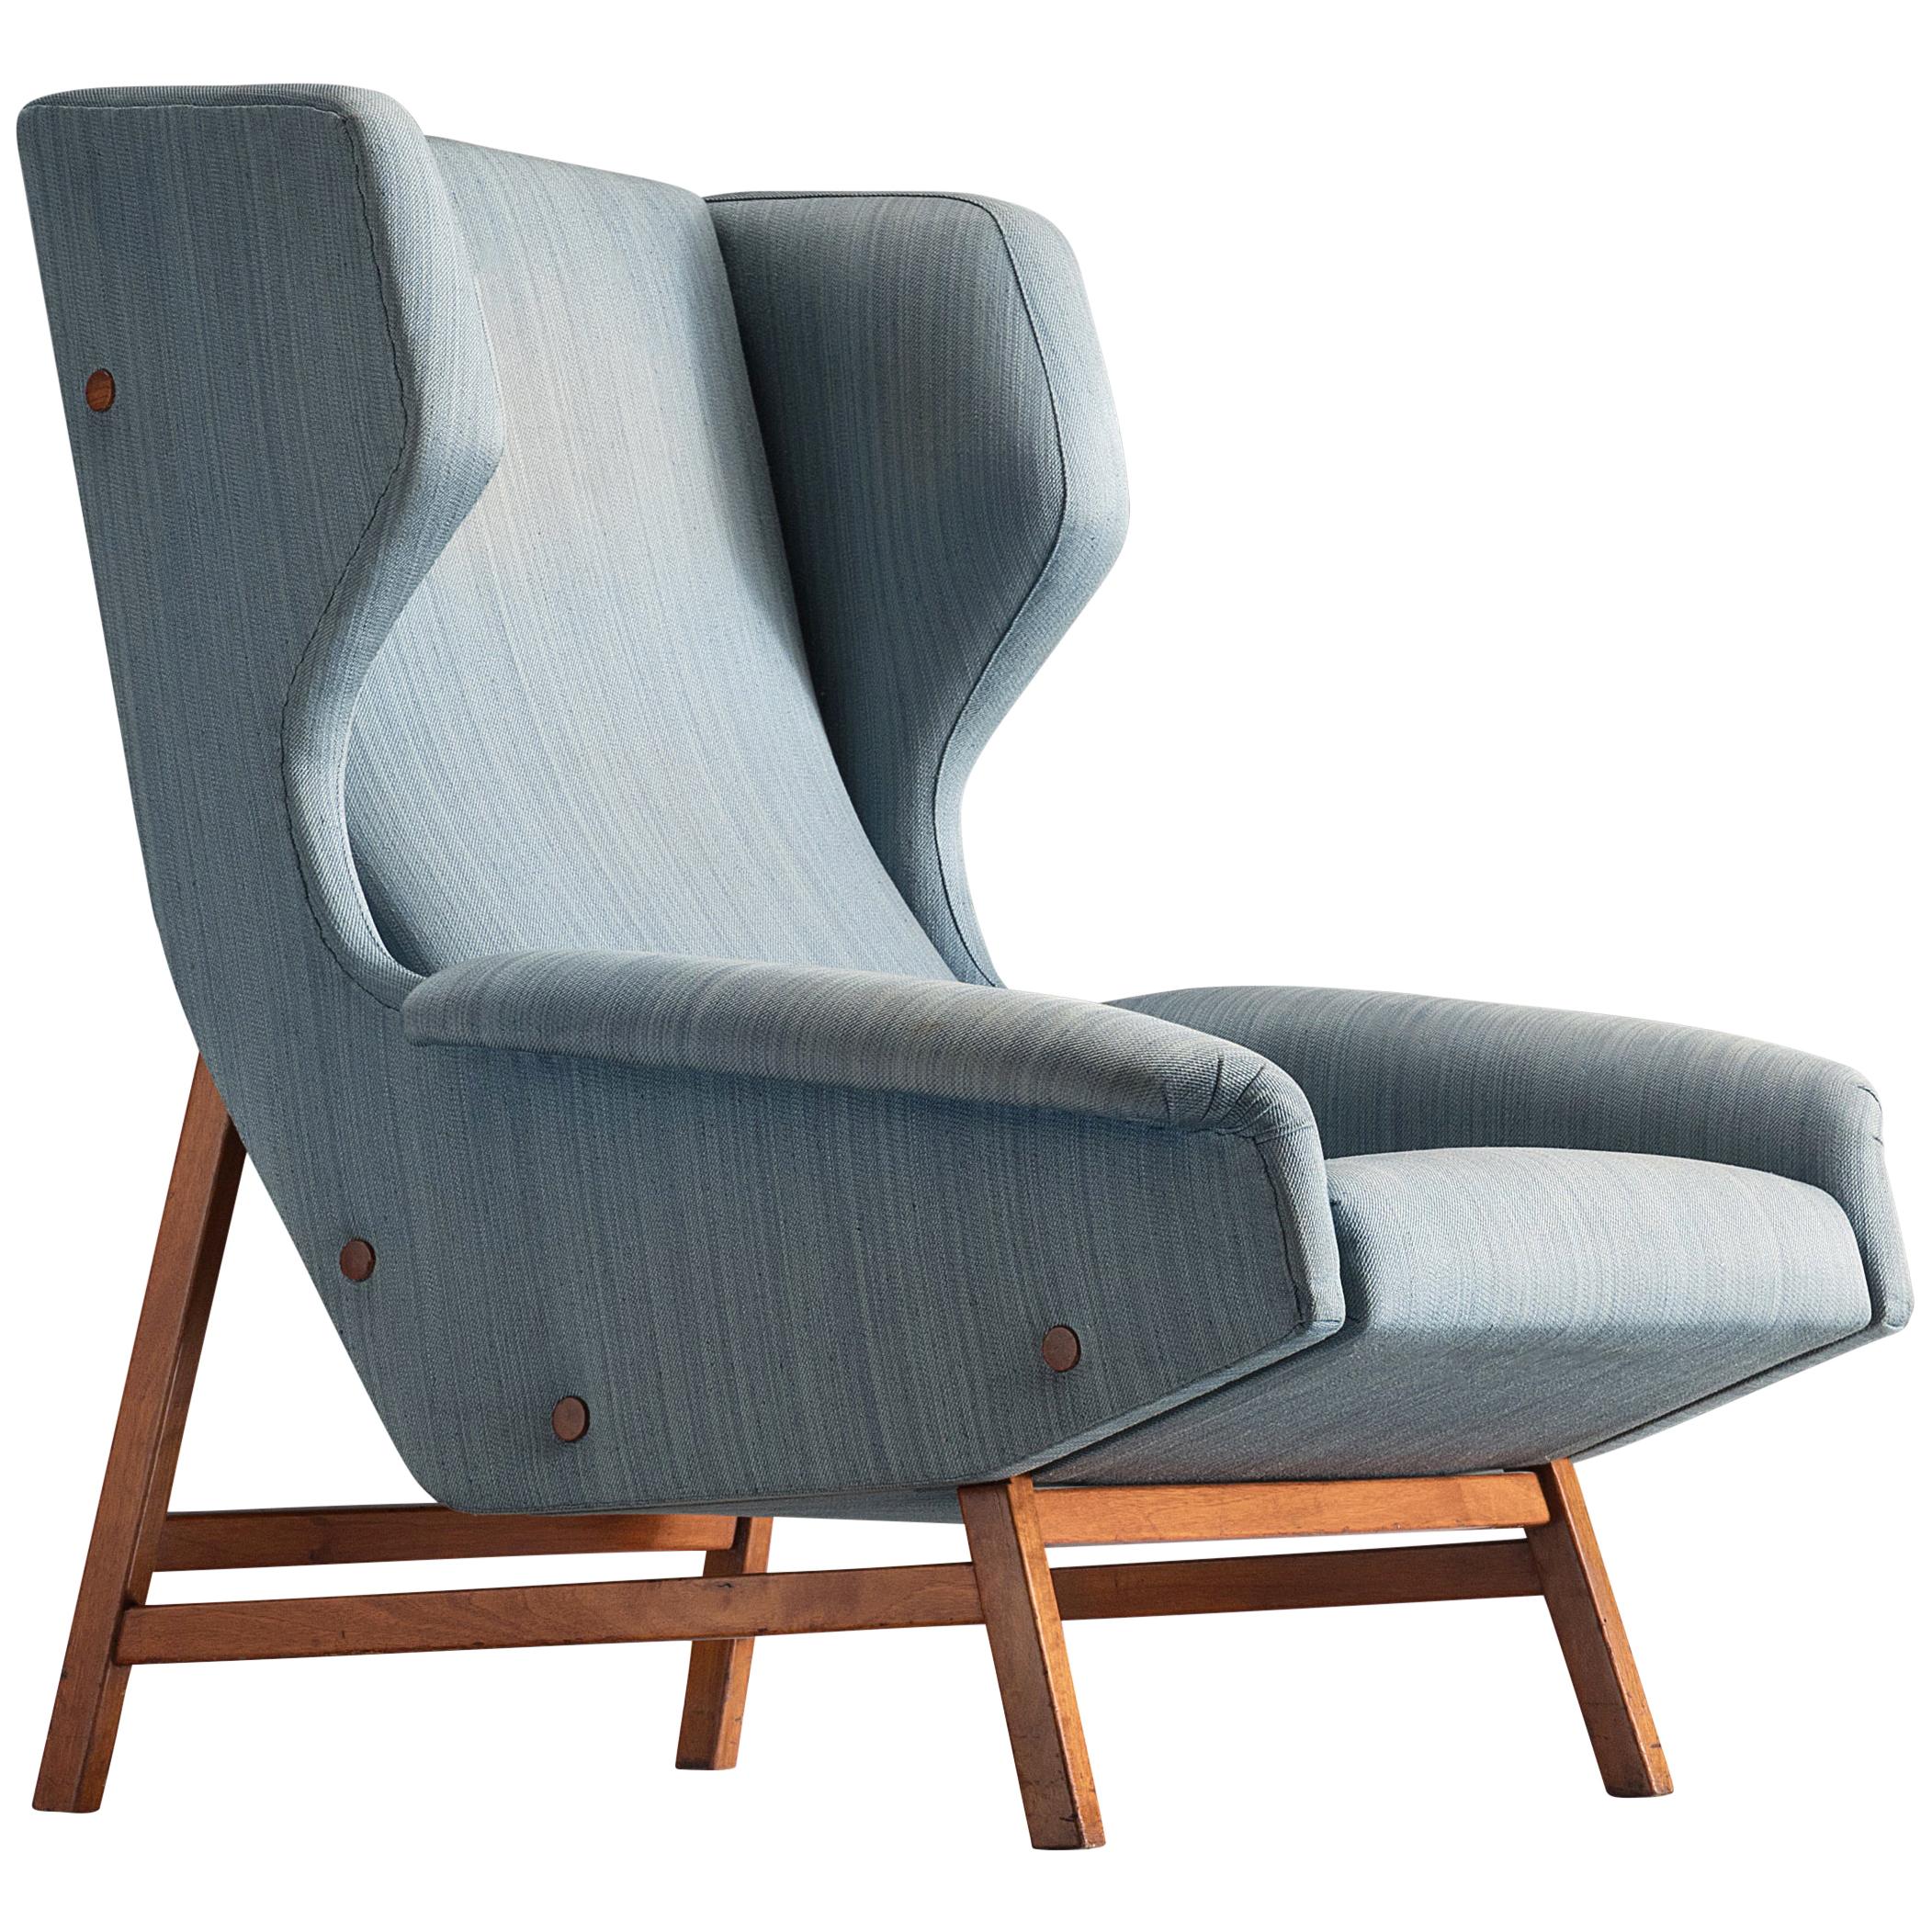 Gianfranco Frattini for Cassina Lounge Chair 877 in Blue Fabric and Teak